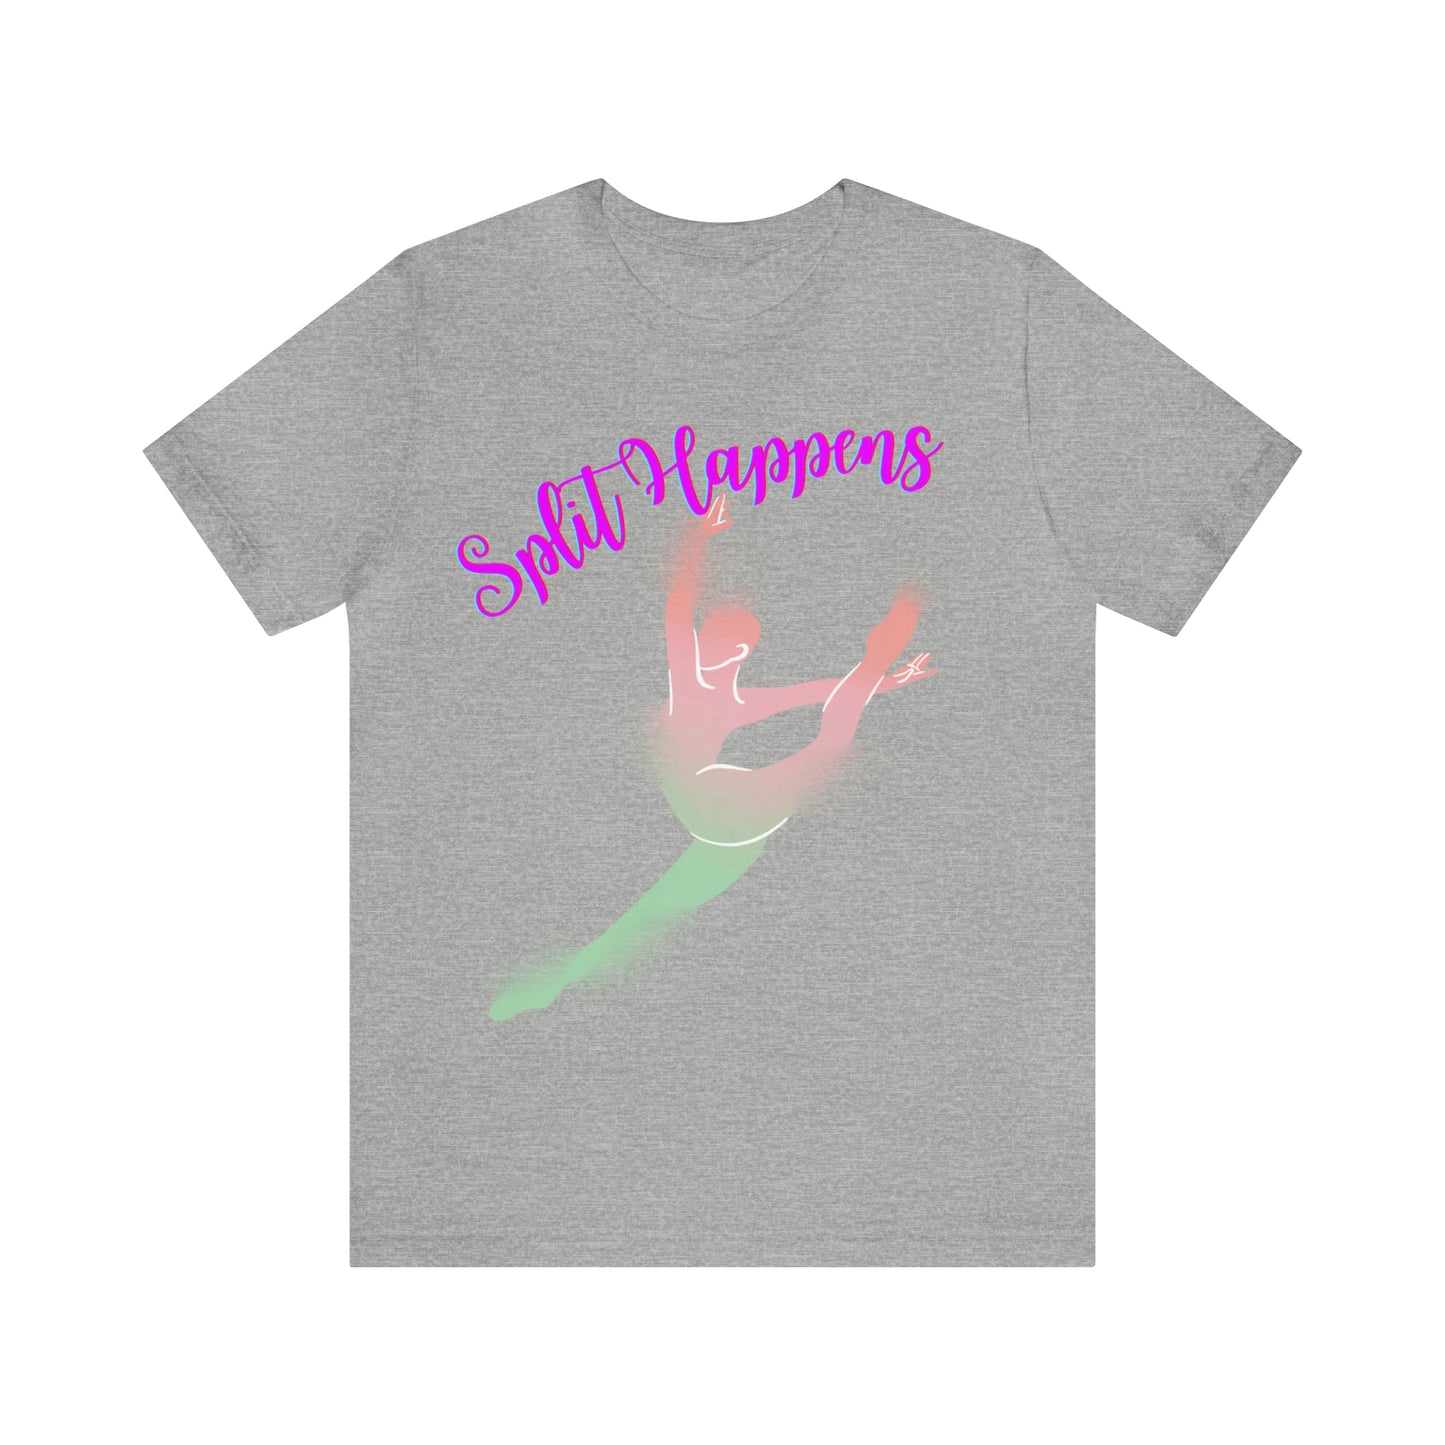 A ballet dance tshirt with the text "Split happens" and a picture of a ballerina doing the splits. The best of all dance t shirts for ballerinas!